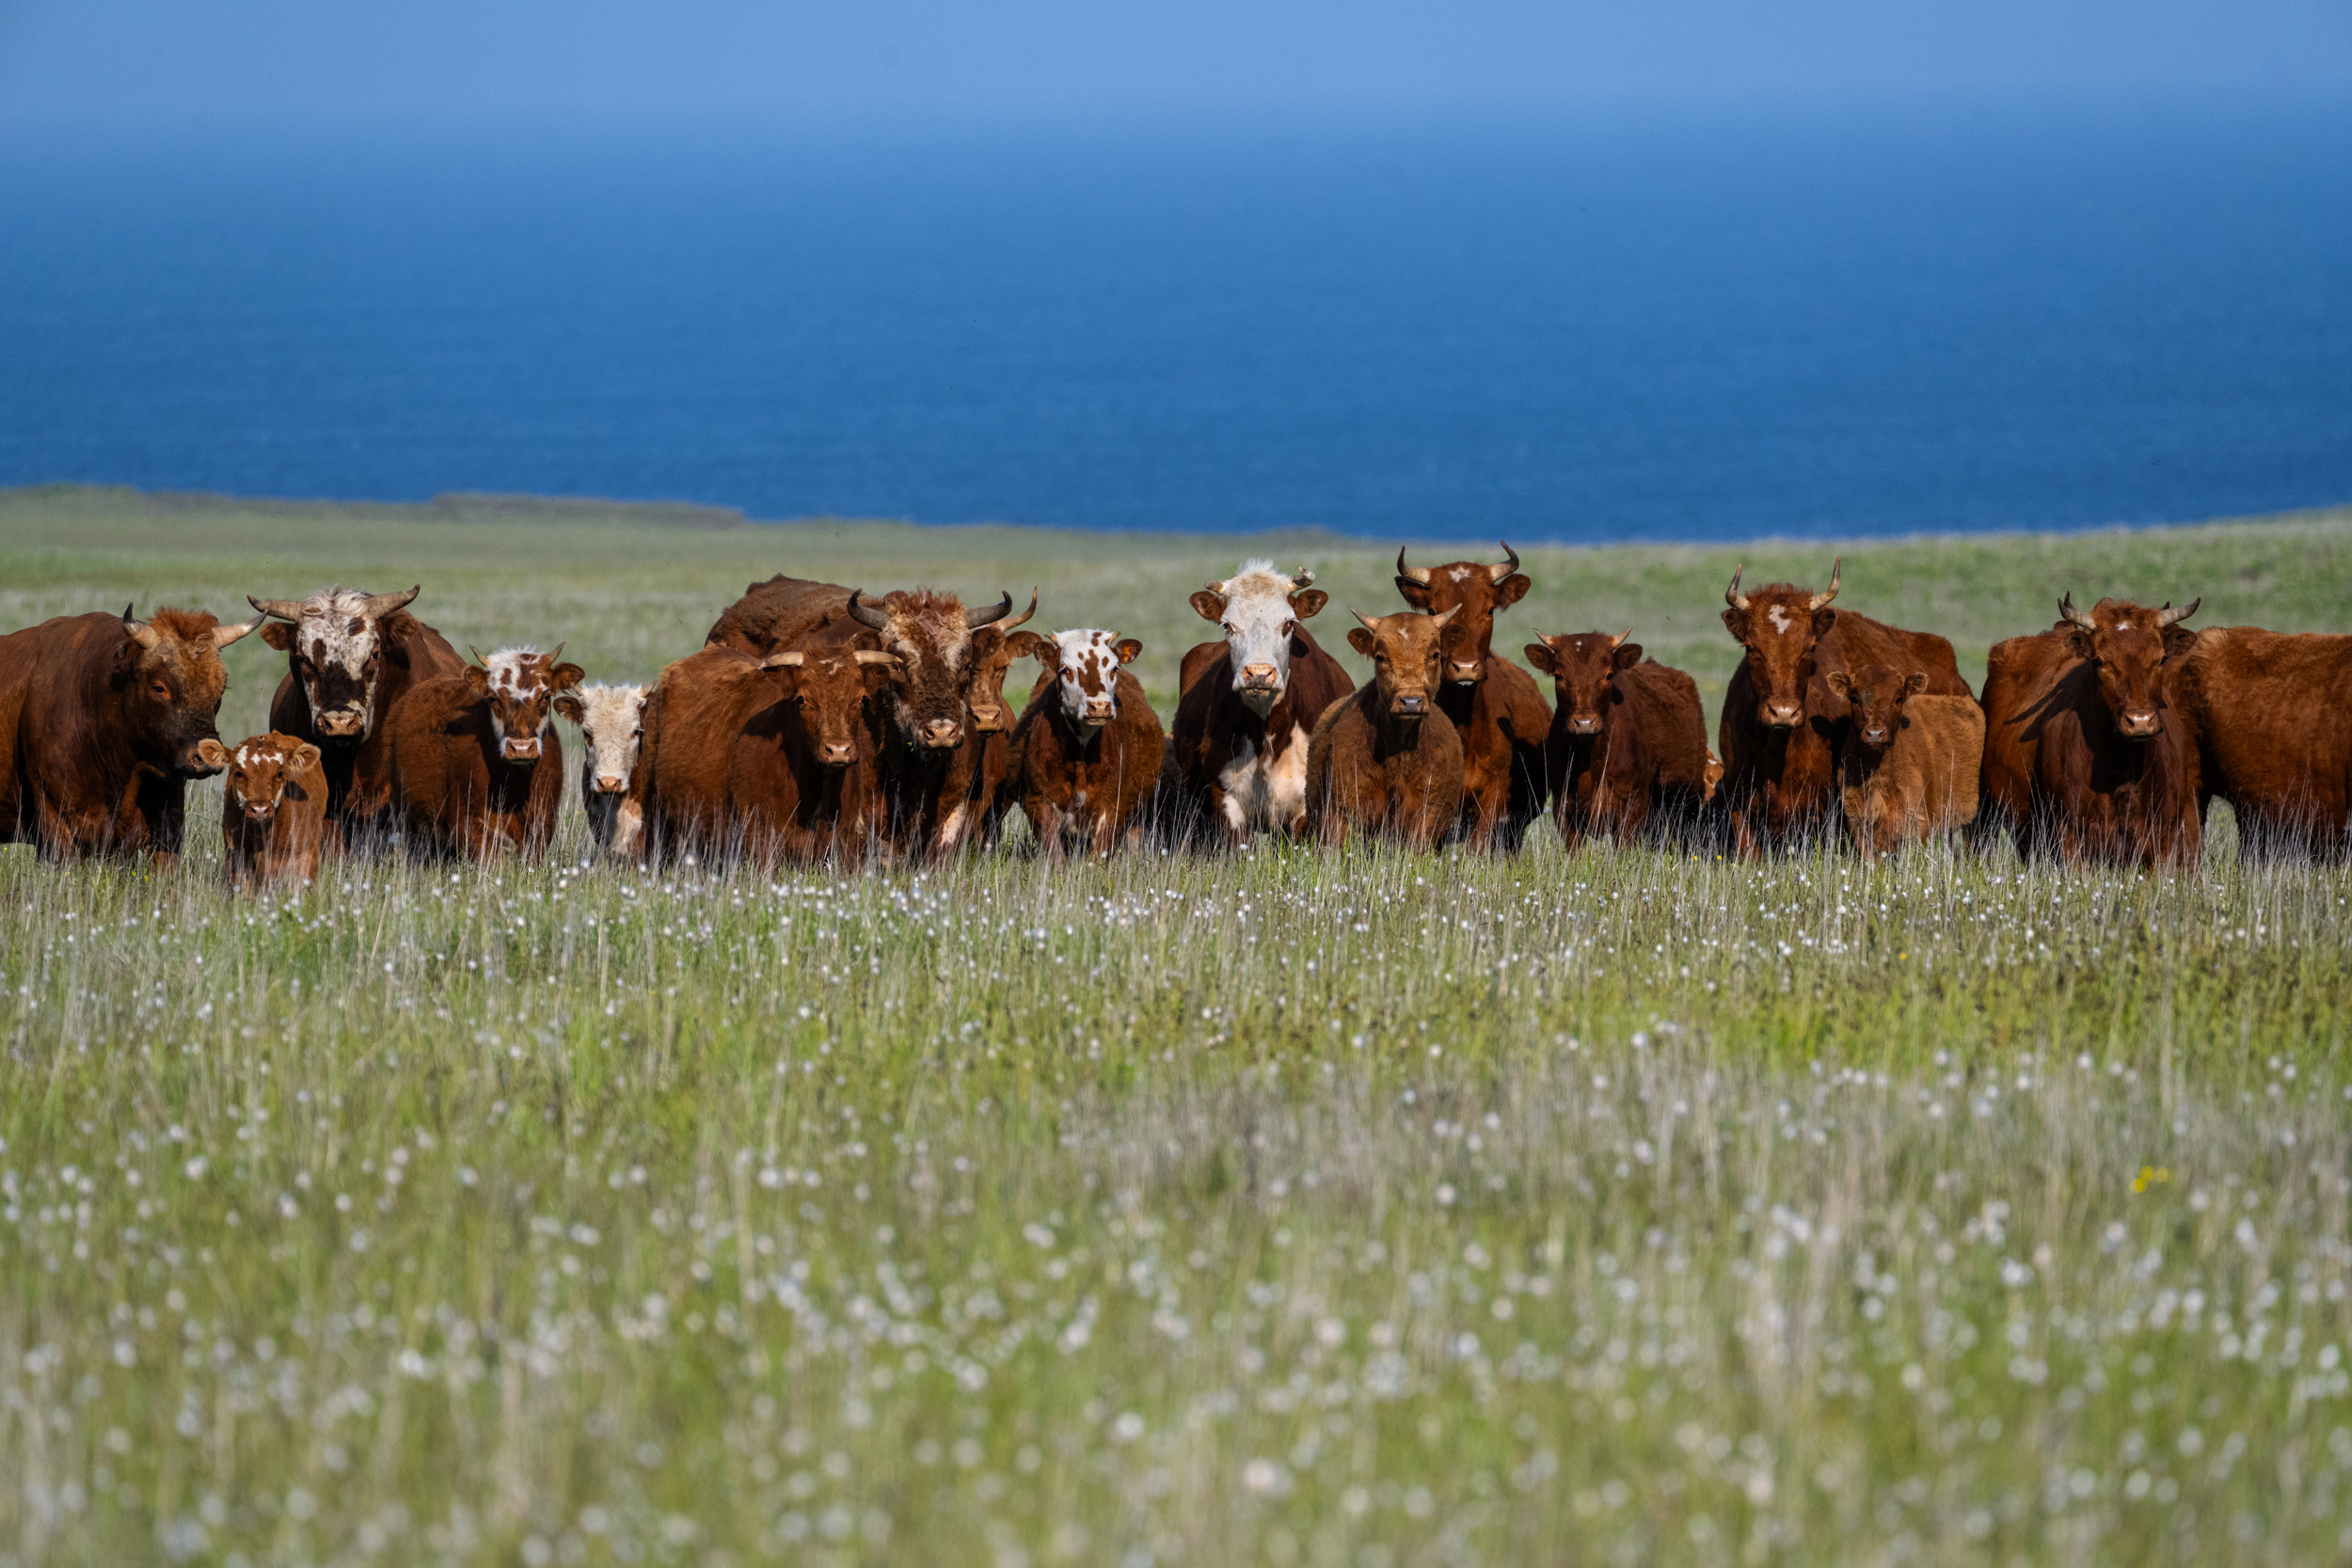 A row of brown and white cows looking straight at the camera on a background of green grass.